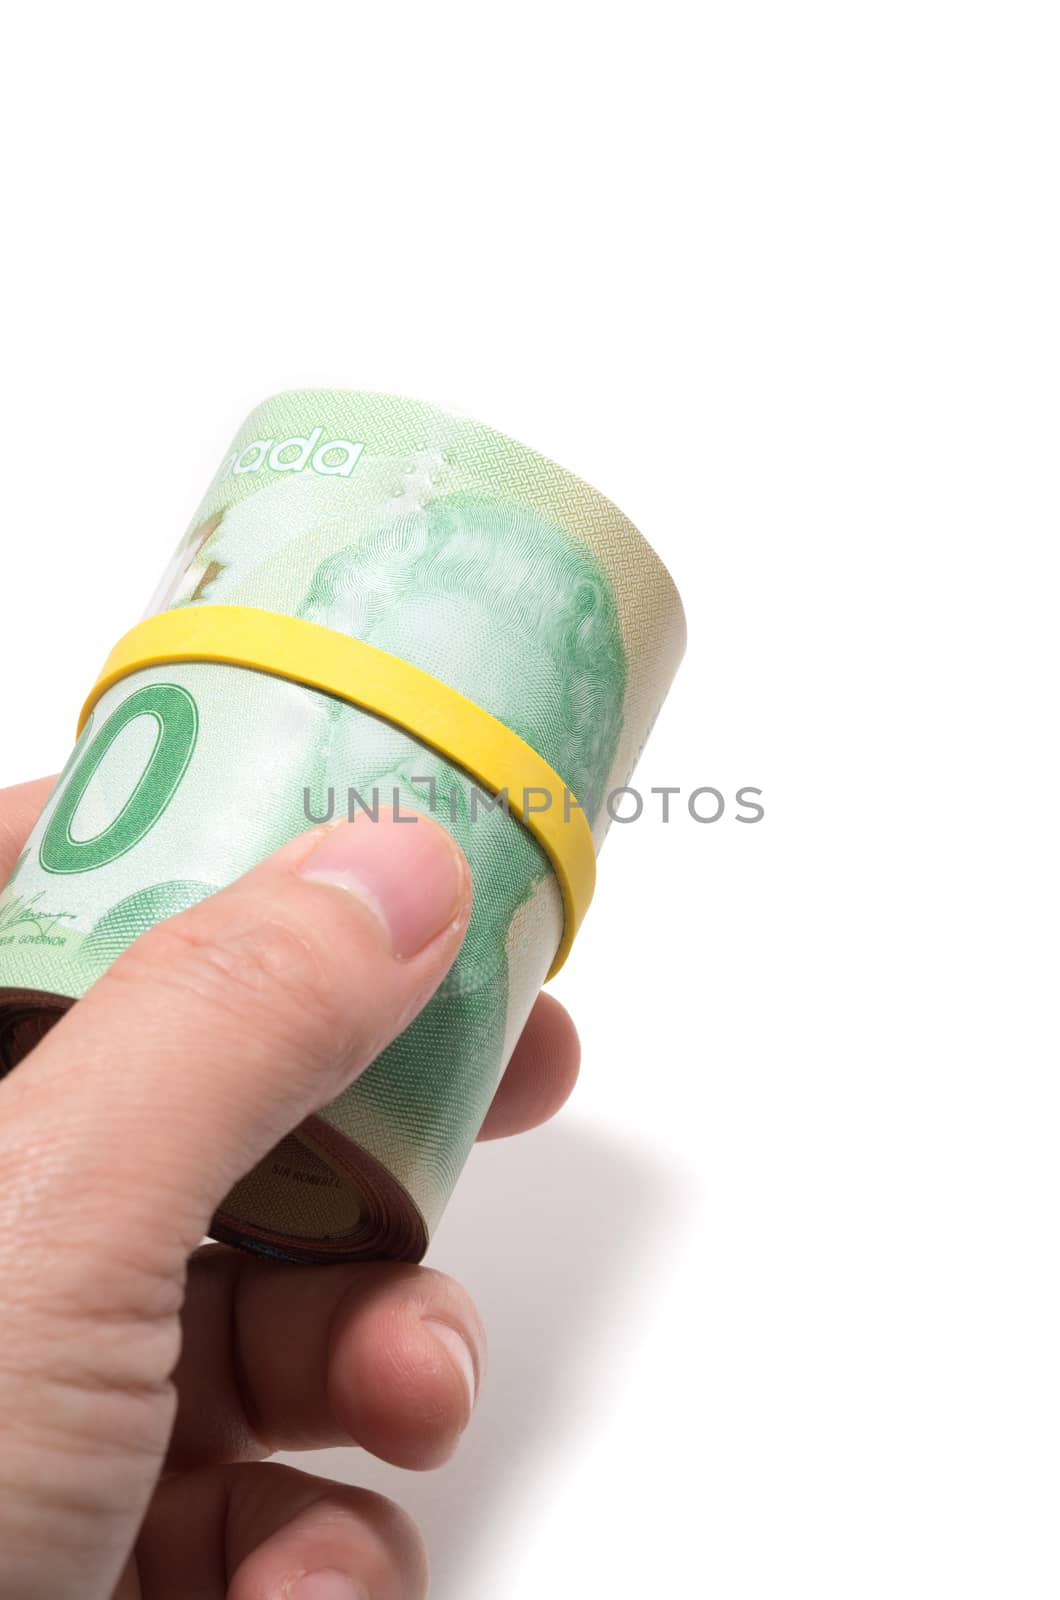 Hand holding a roll of 20 dollars Canadian with yellow plastic band over the eyes of the queen Elizabeth.